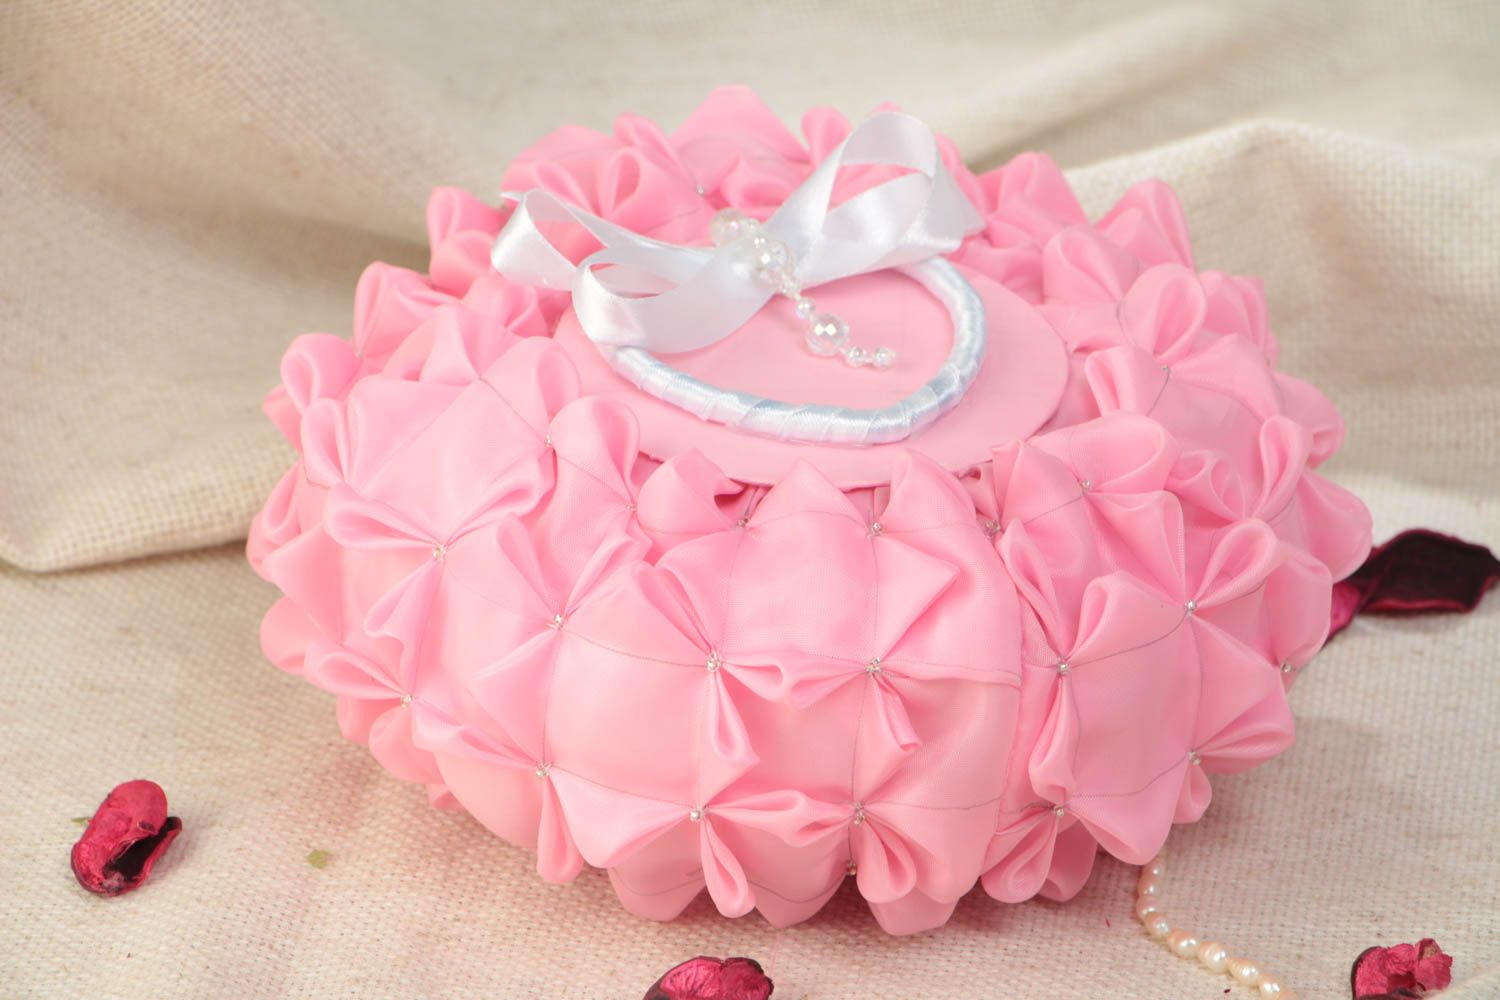 Handmade pink satin ring pillow with white bow designer wedding accessory photo 1